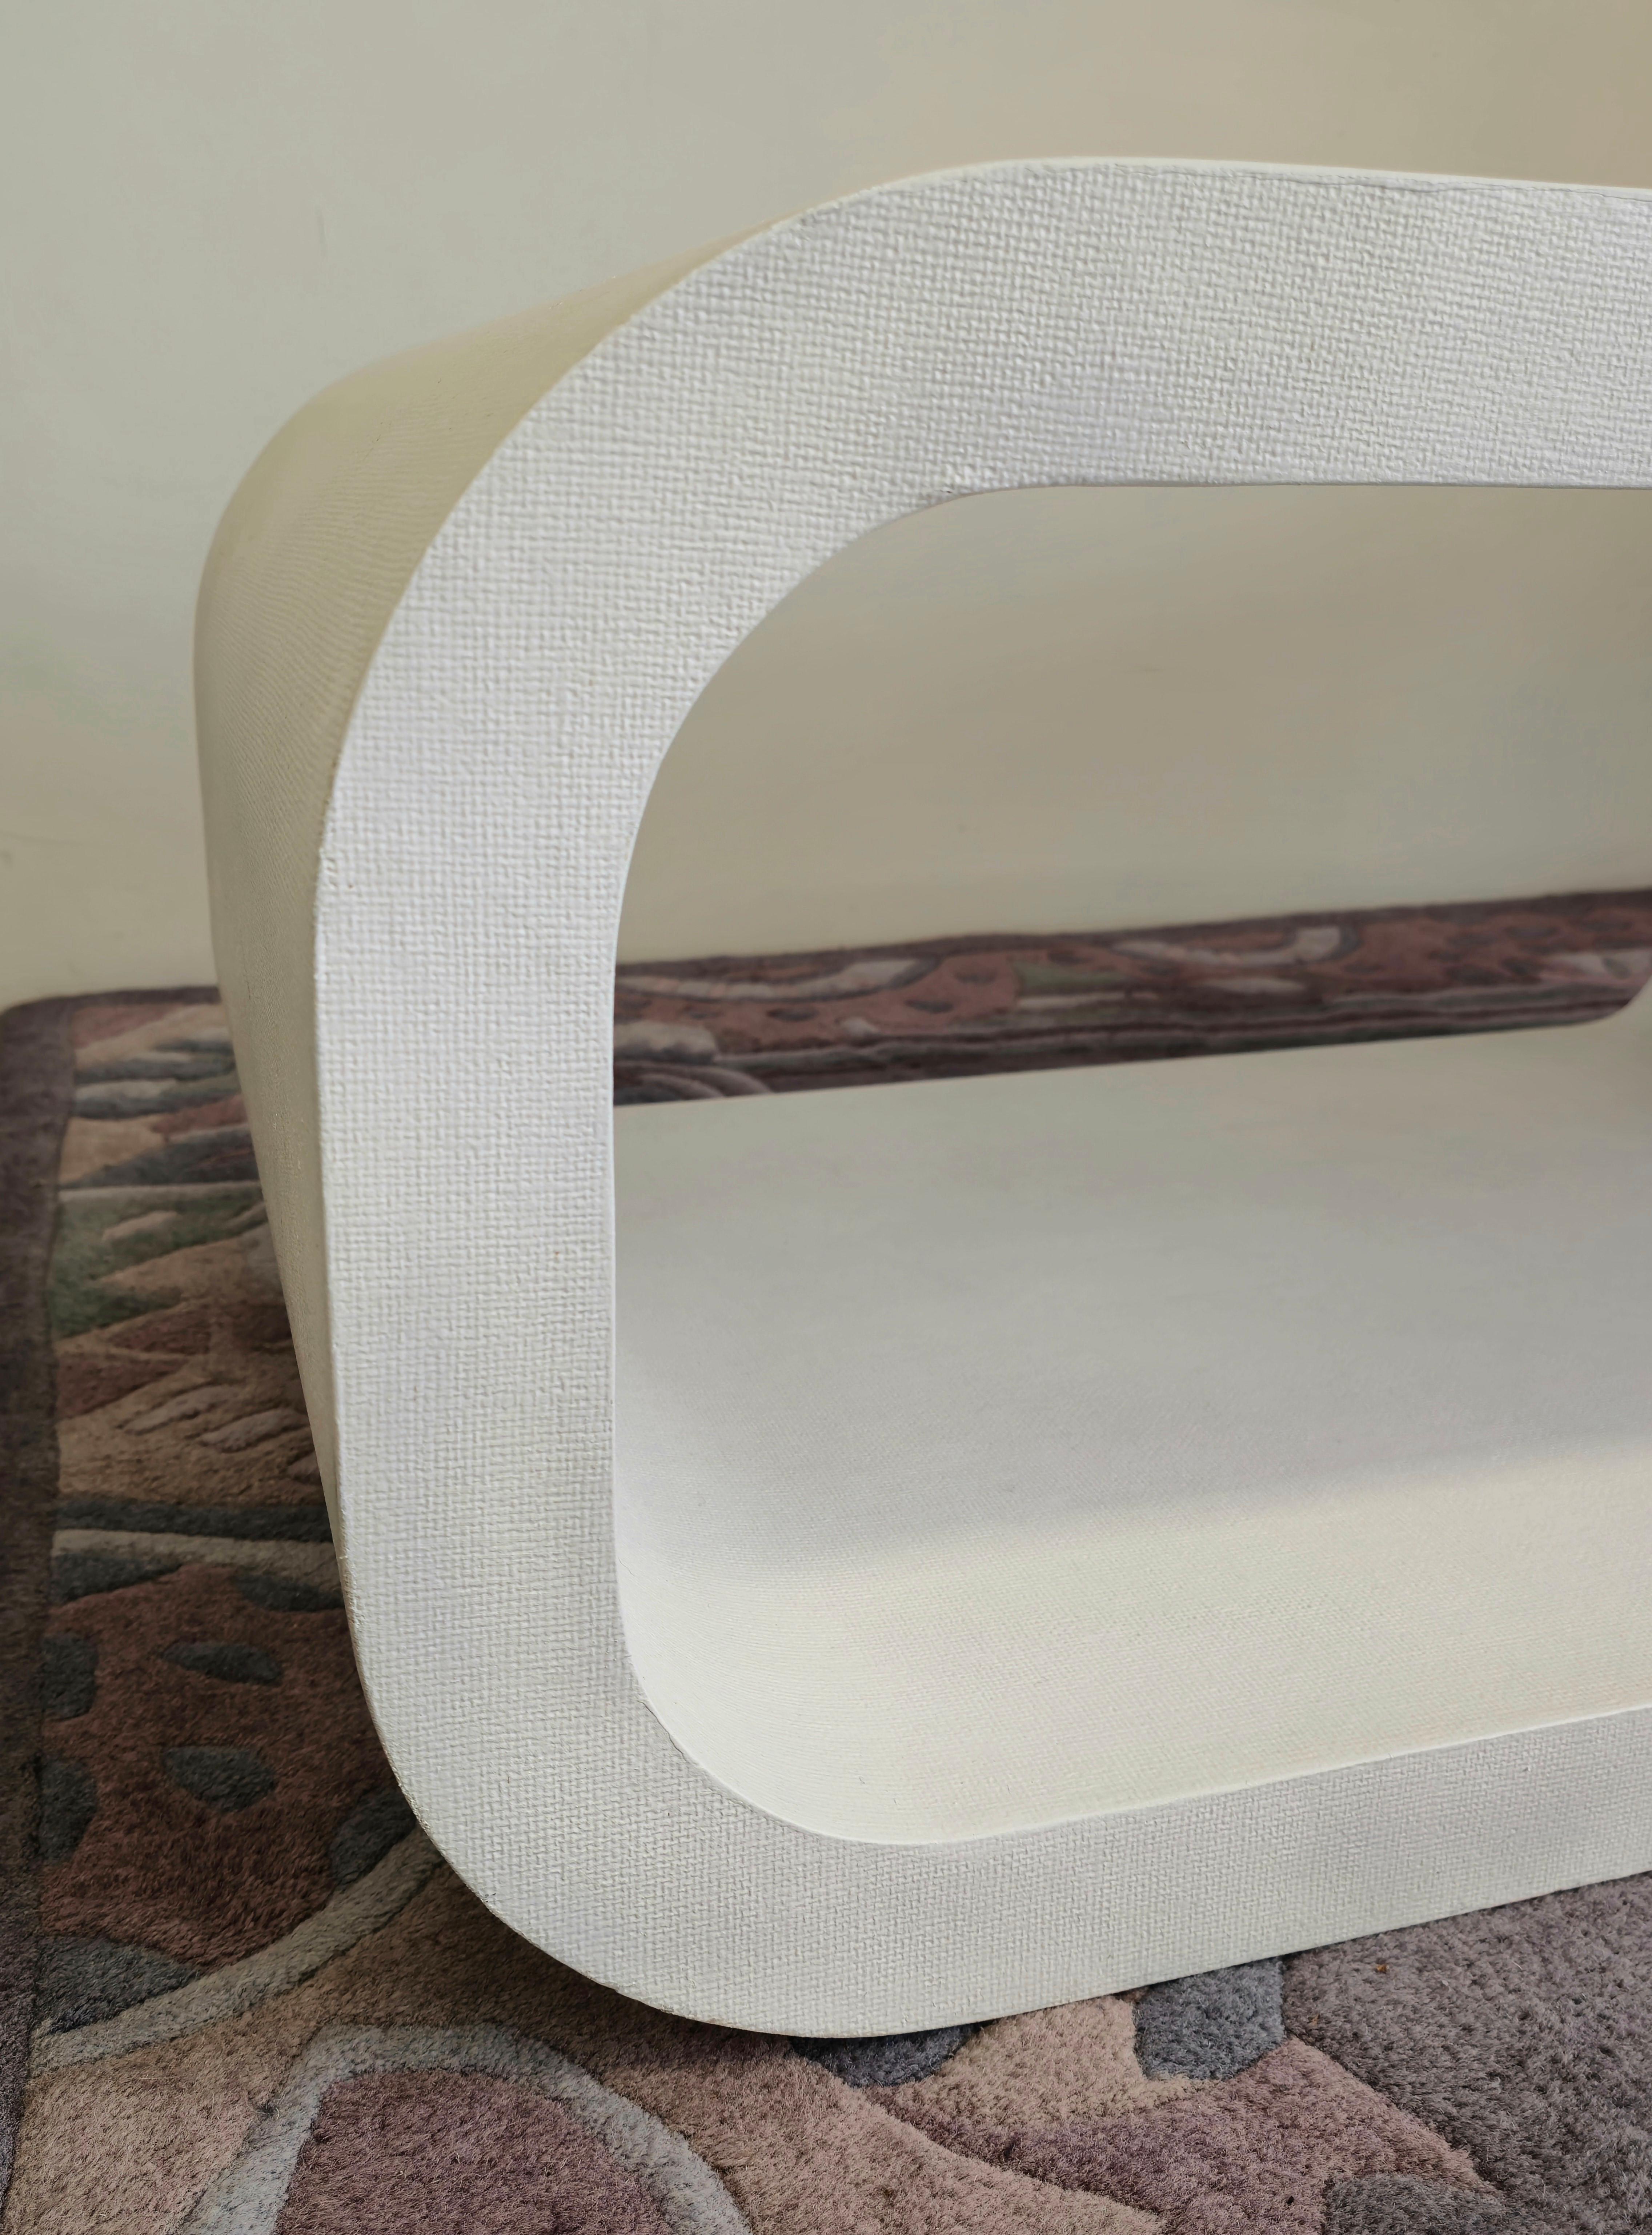 A stunning assymetrical cantilevered coffee table made in the 1970s. This meticulously crafted coffee table is cantilevered and linen wrapped with a white finish. The cantilevered shape has a wider top with a more narrow footing which is curved